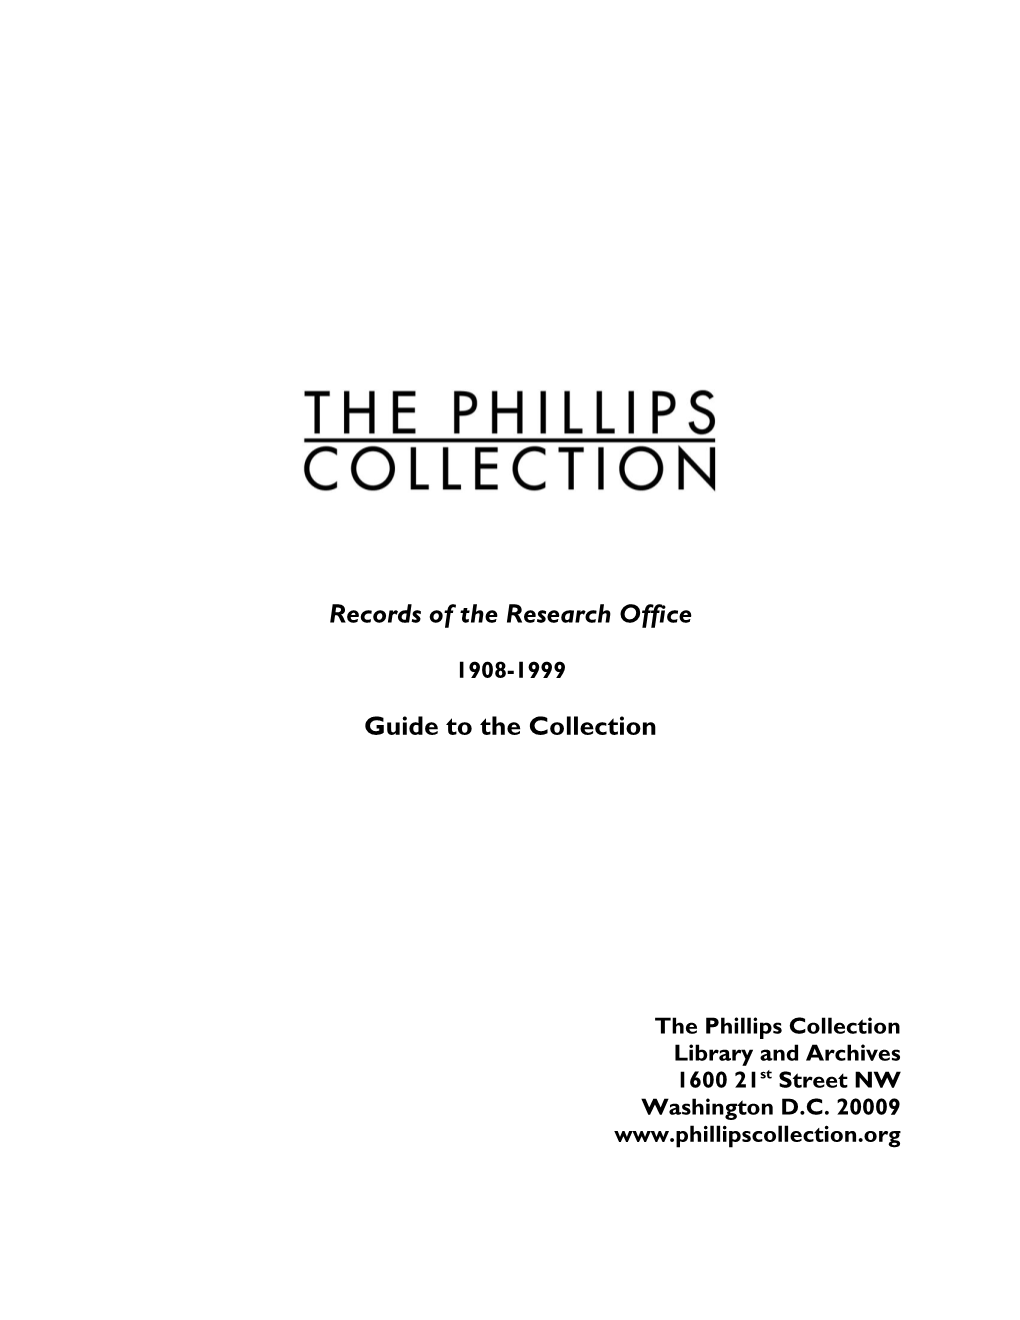 Guide to the Records of the Research Office